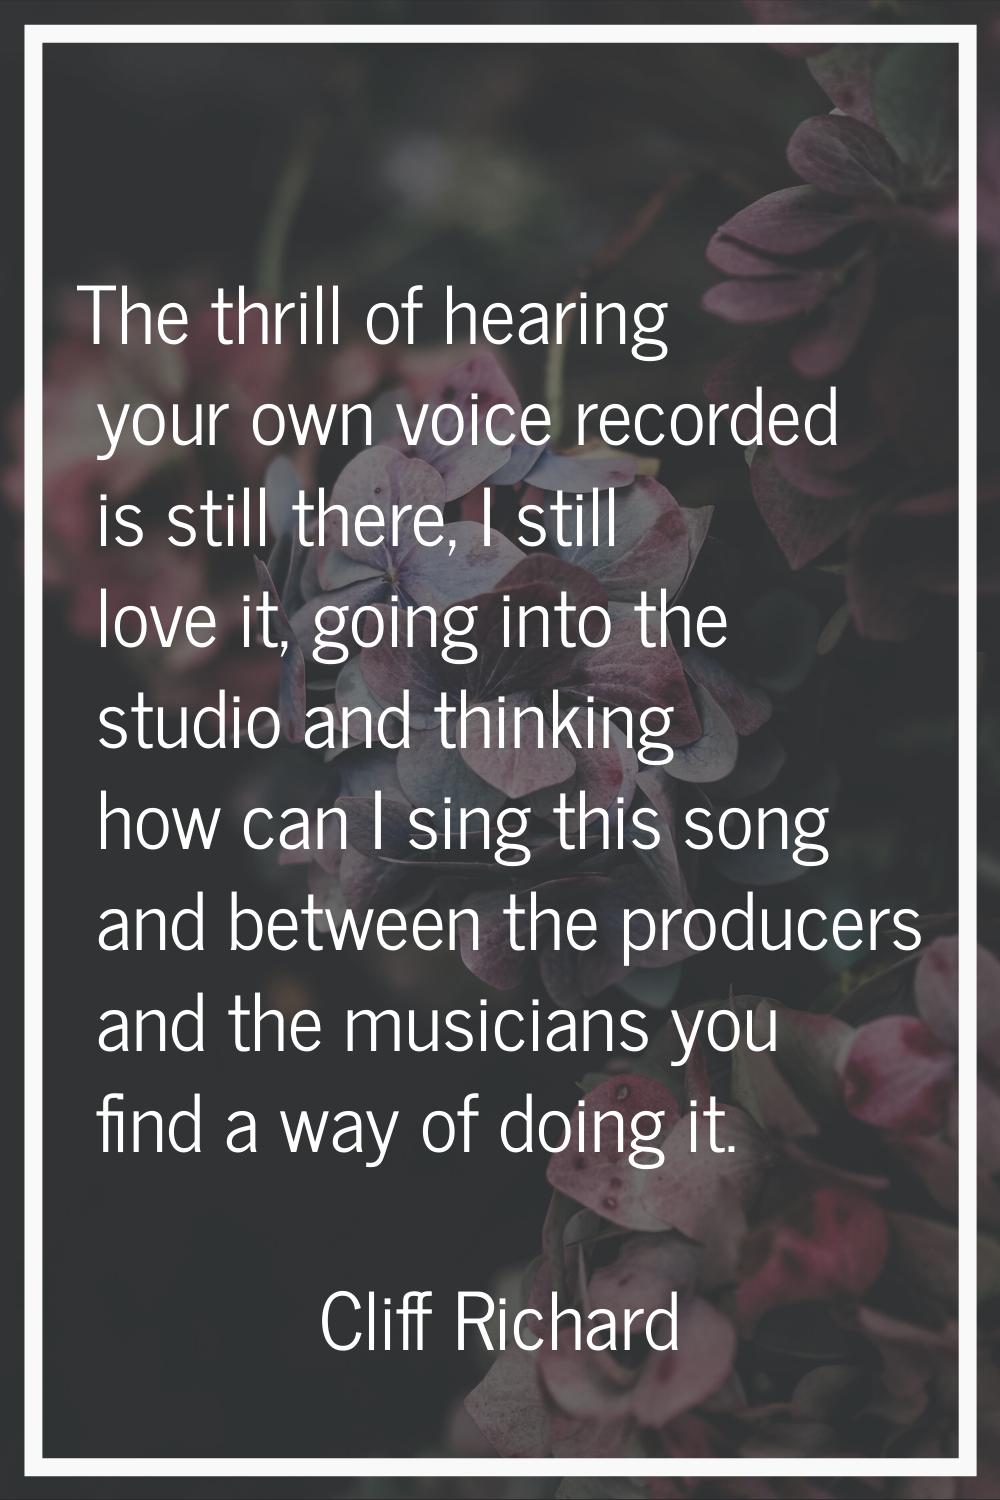 The thrill of hearing your own voice recorded is still there, I still love it, going into the studi